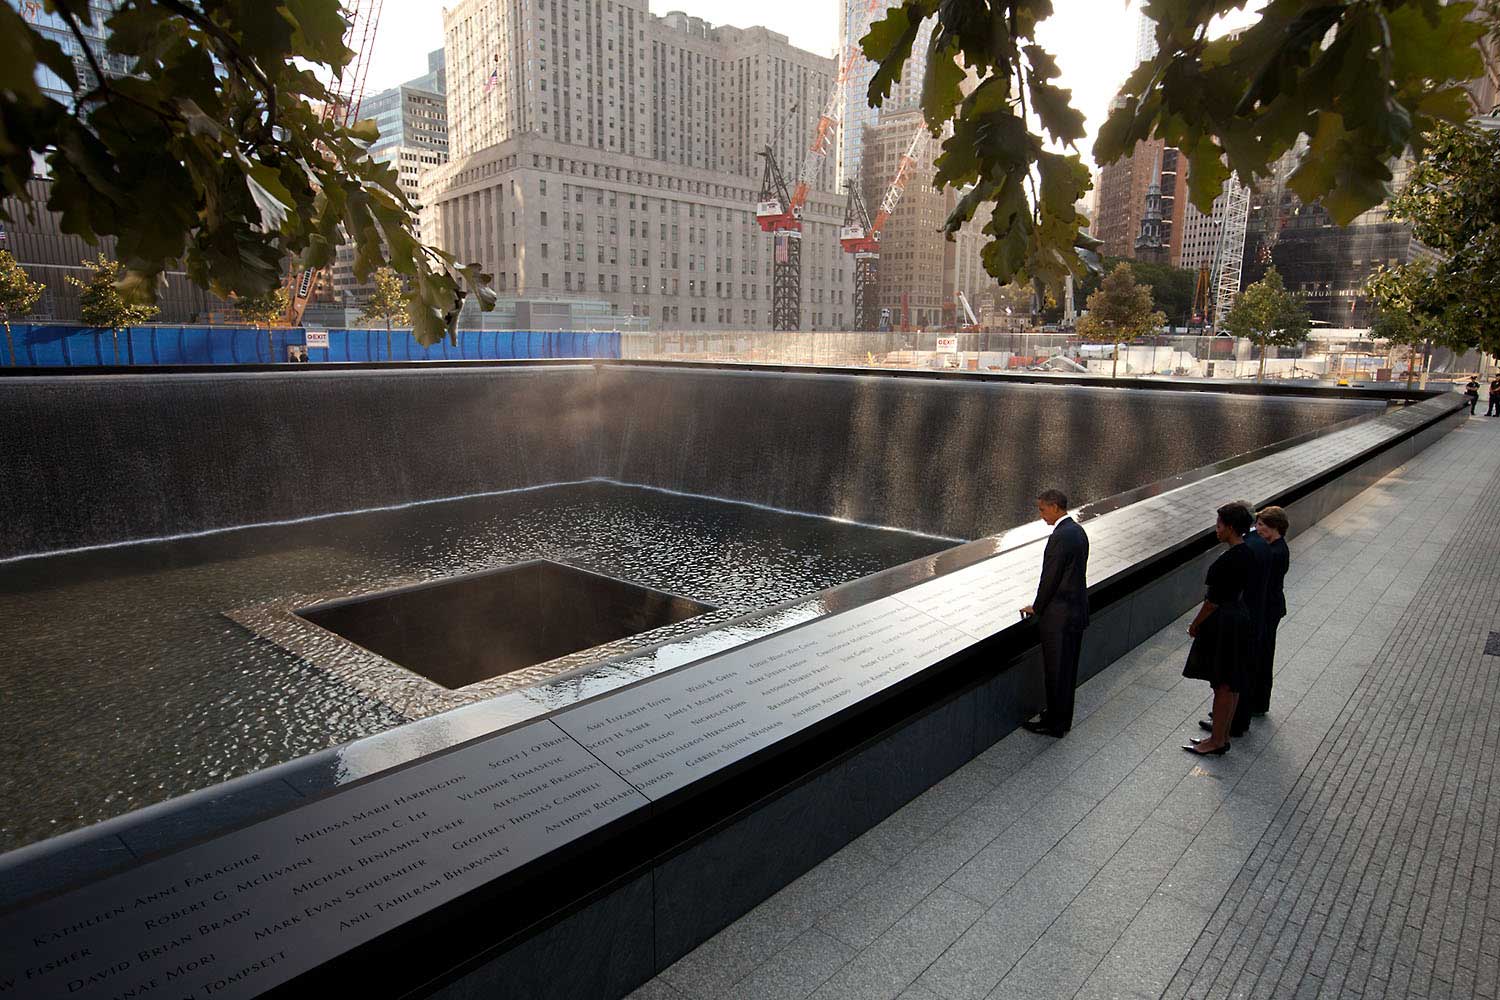 "Chuck Kennedy captured this scene with a remote camera as the President and First Lady, along with former President George W. Bush and former First Lady Laura Bush, paused at the North Memorial Pool of the National September 11 Memorial in New York City. The North Memorial pool sits in the footprint of the north tower, formerly 1 World Trade Center."